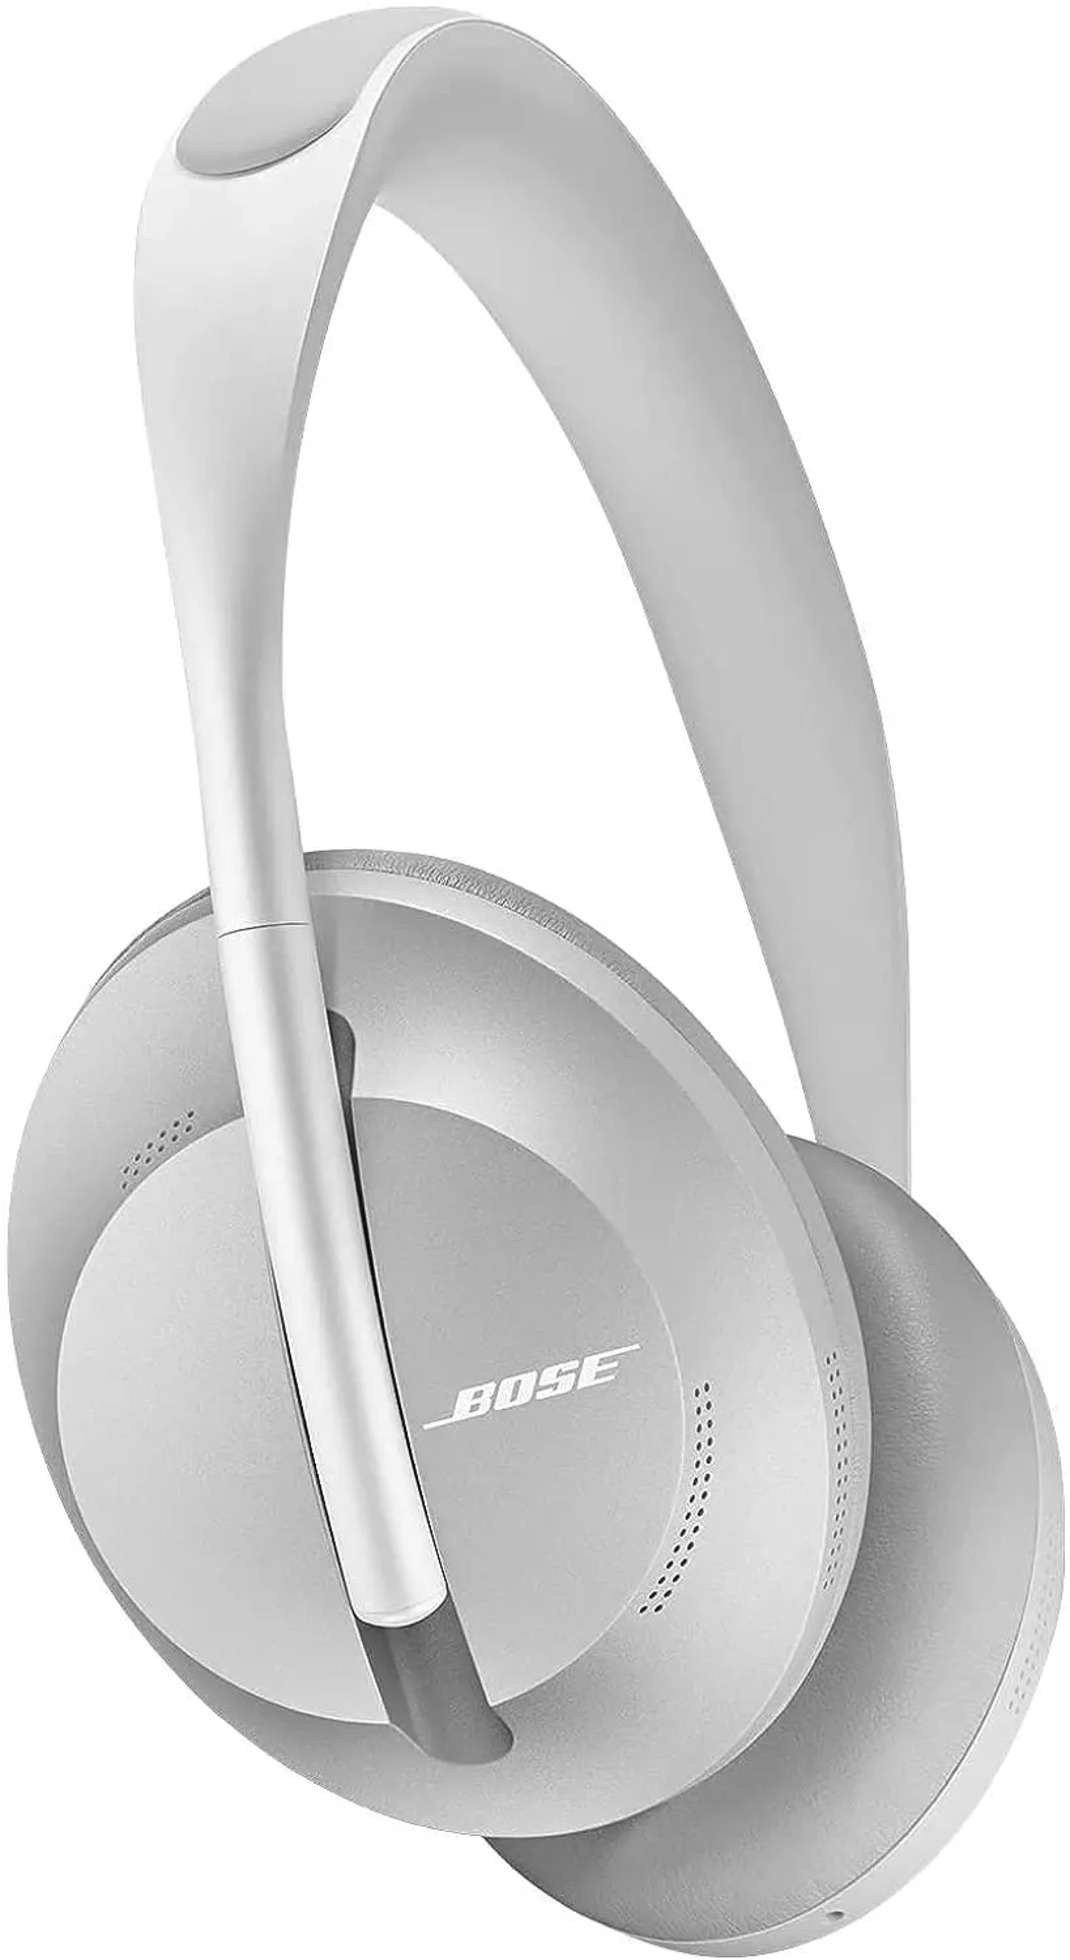 Compare Bose 700 Noise Cancelling Bluetooth Headphones (Sliver Luxe) vs JBL  Tour One M2 Bluetooth v5.3 Over the Ear Headphone with Mic (Champagne Gold)  - Bose 700 Noise Cancelling Bluetooth Headphones (Sliver